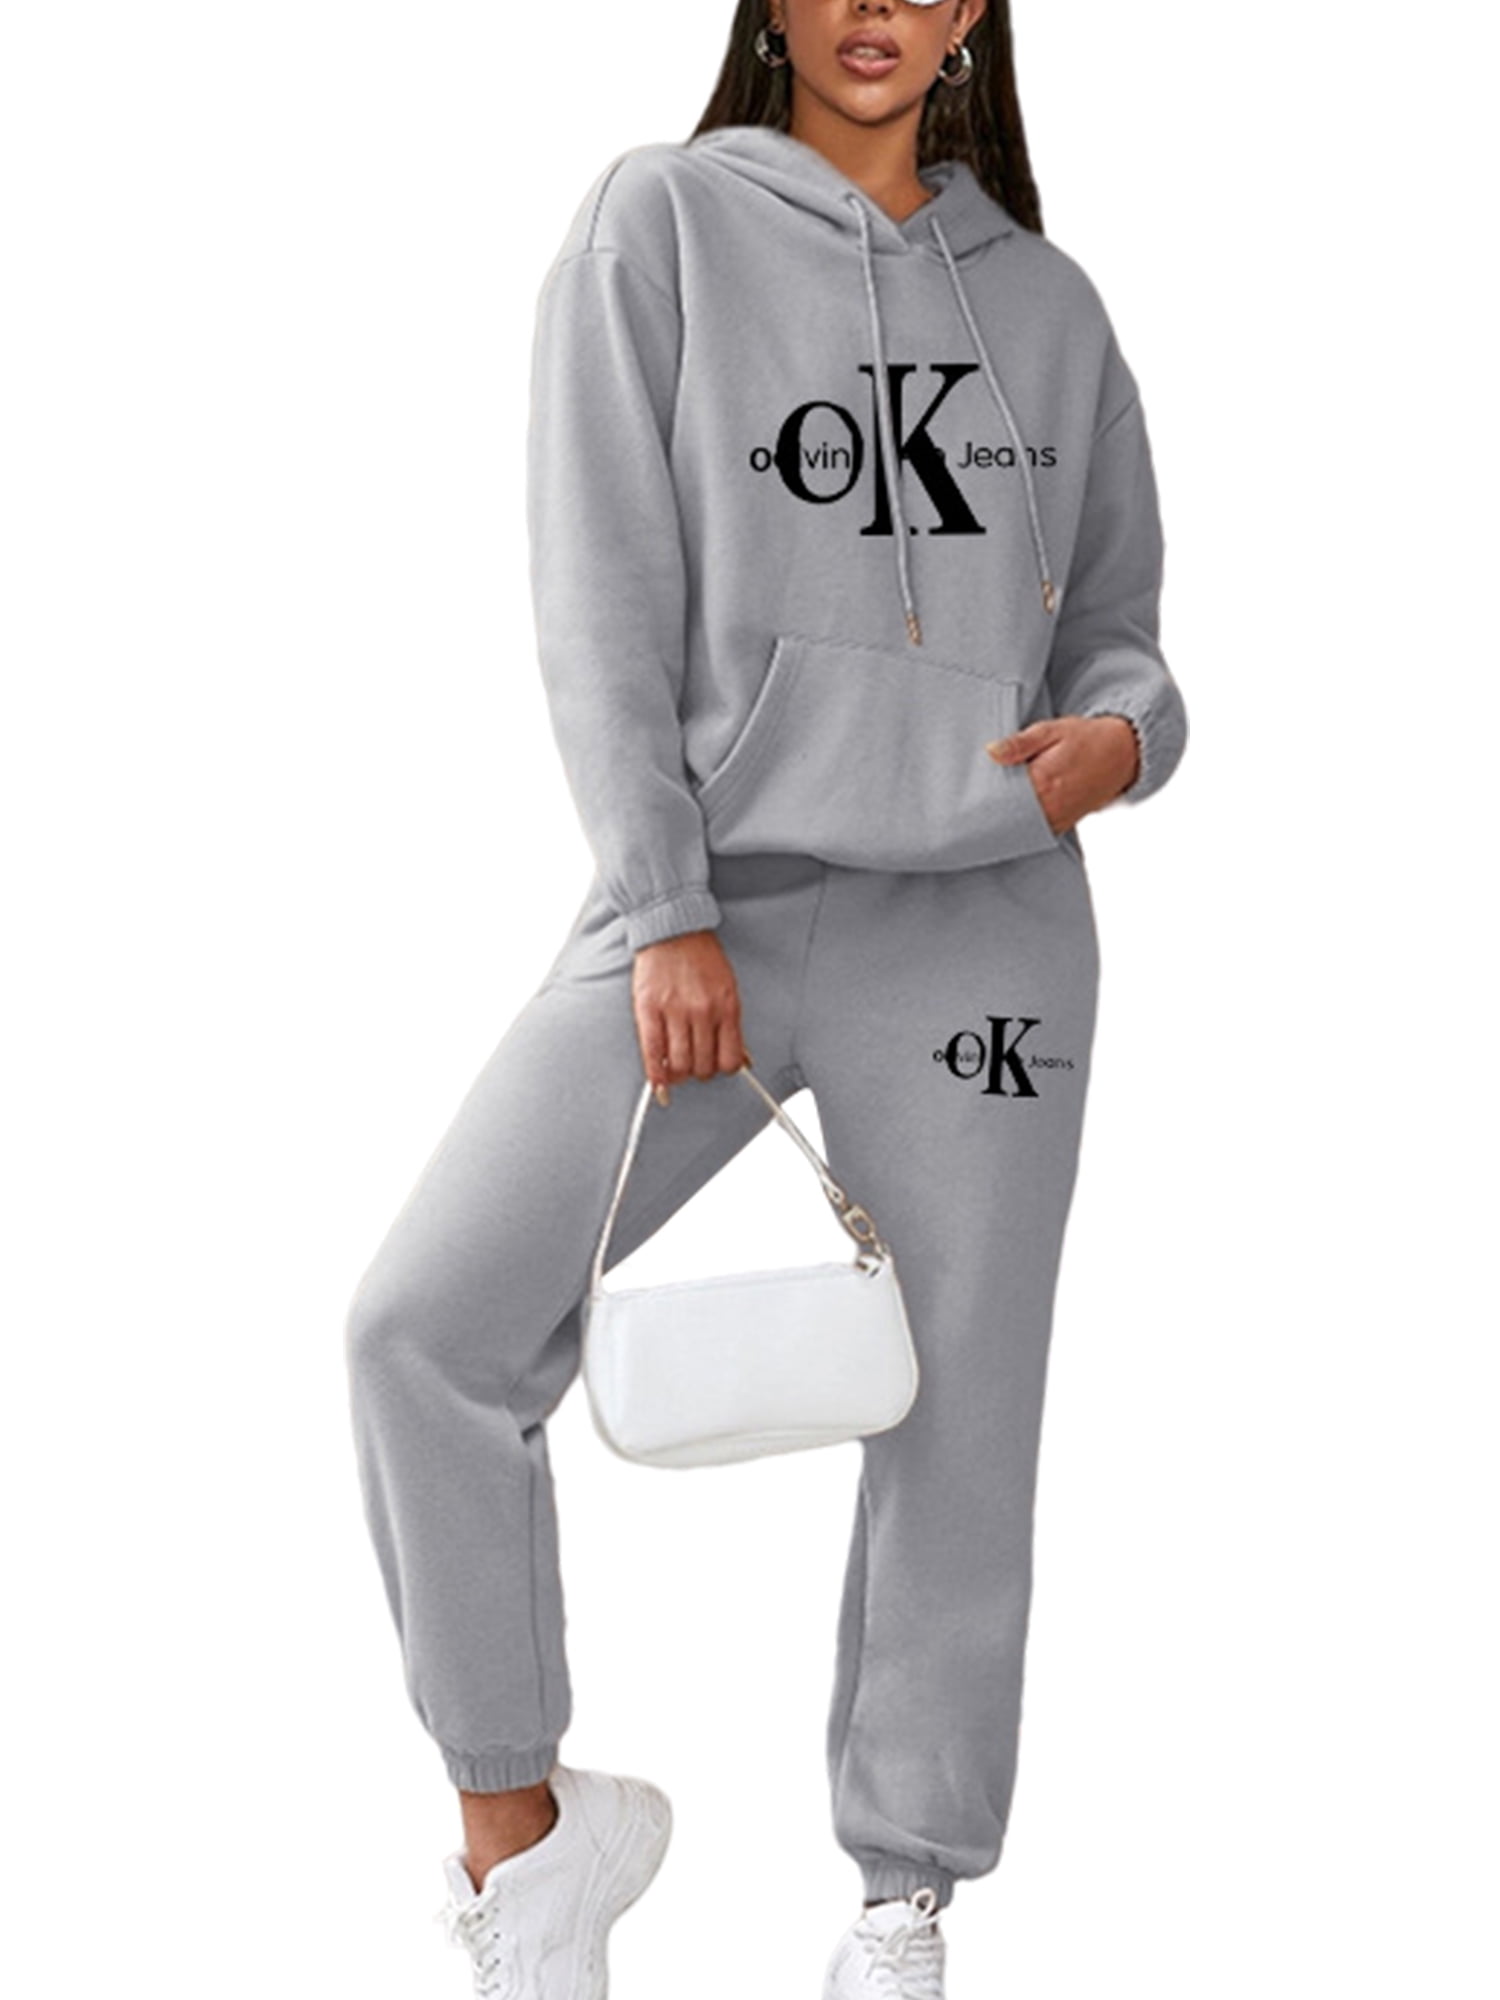 Womens Tracksuit Set 2 Pieces Casual Loungewear Joggers Long Sleeve Sweatshirt Sleepwear Vogue Pullover Tops and Drawstring Pants Outfits Sets 